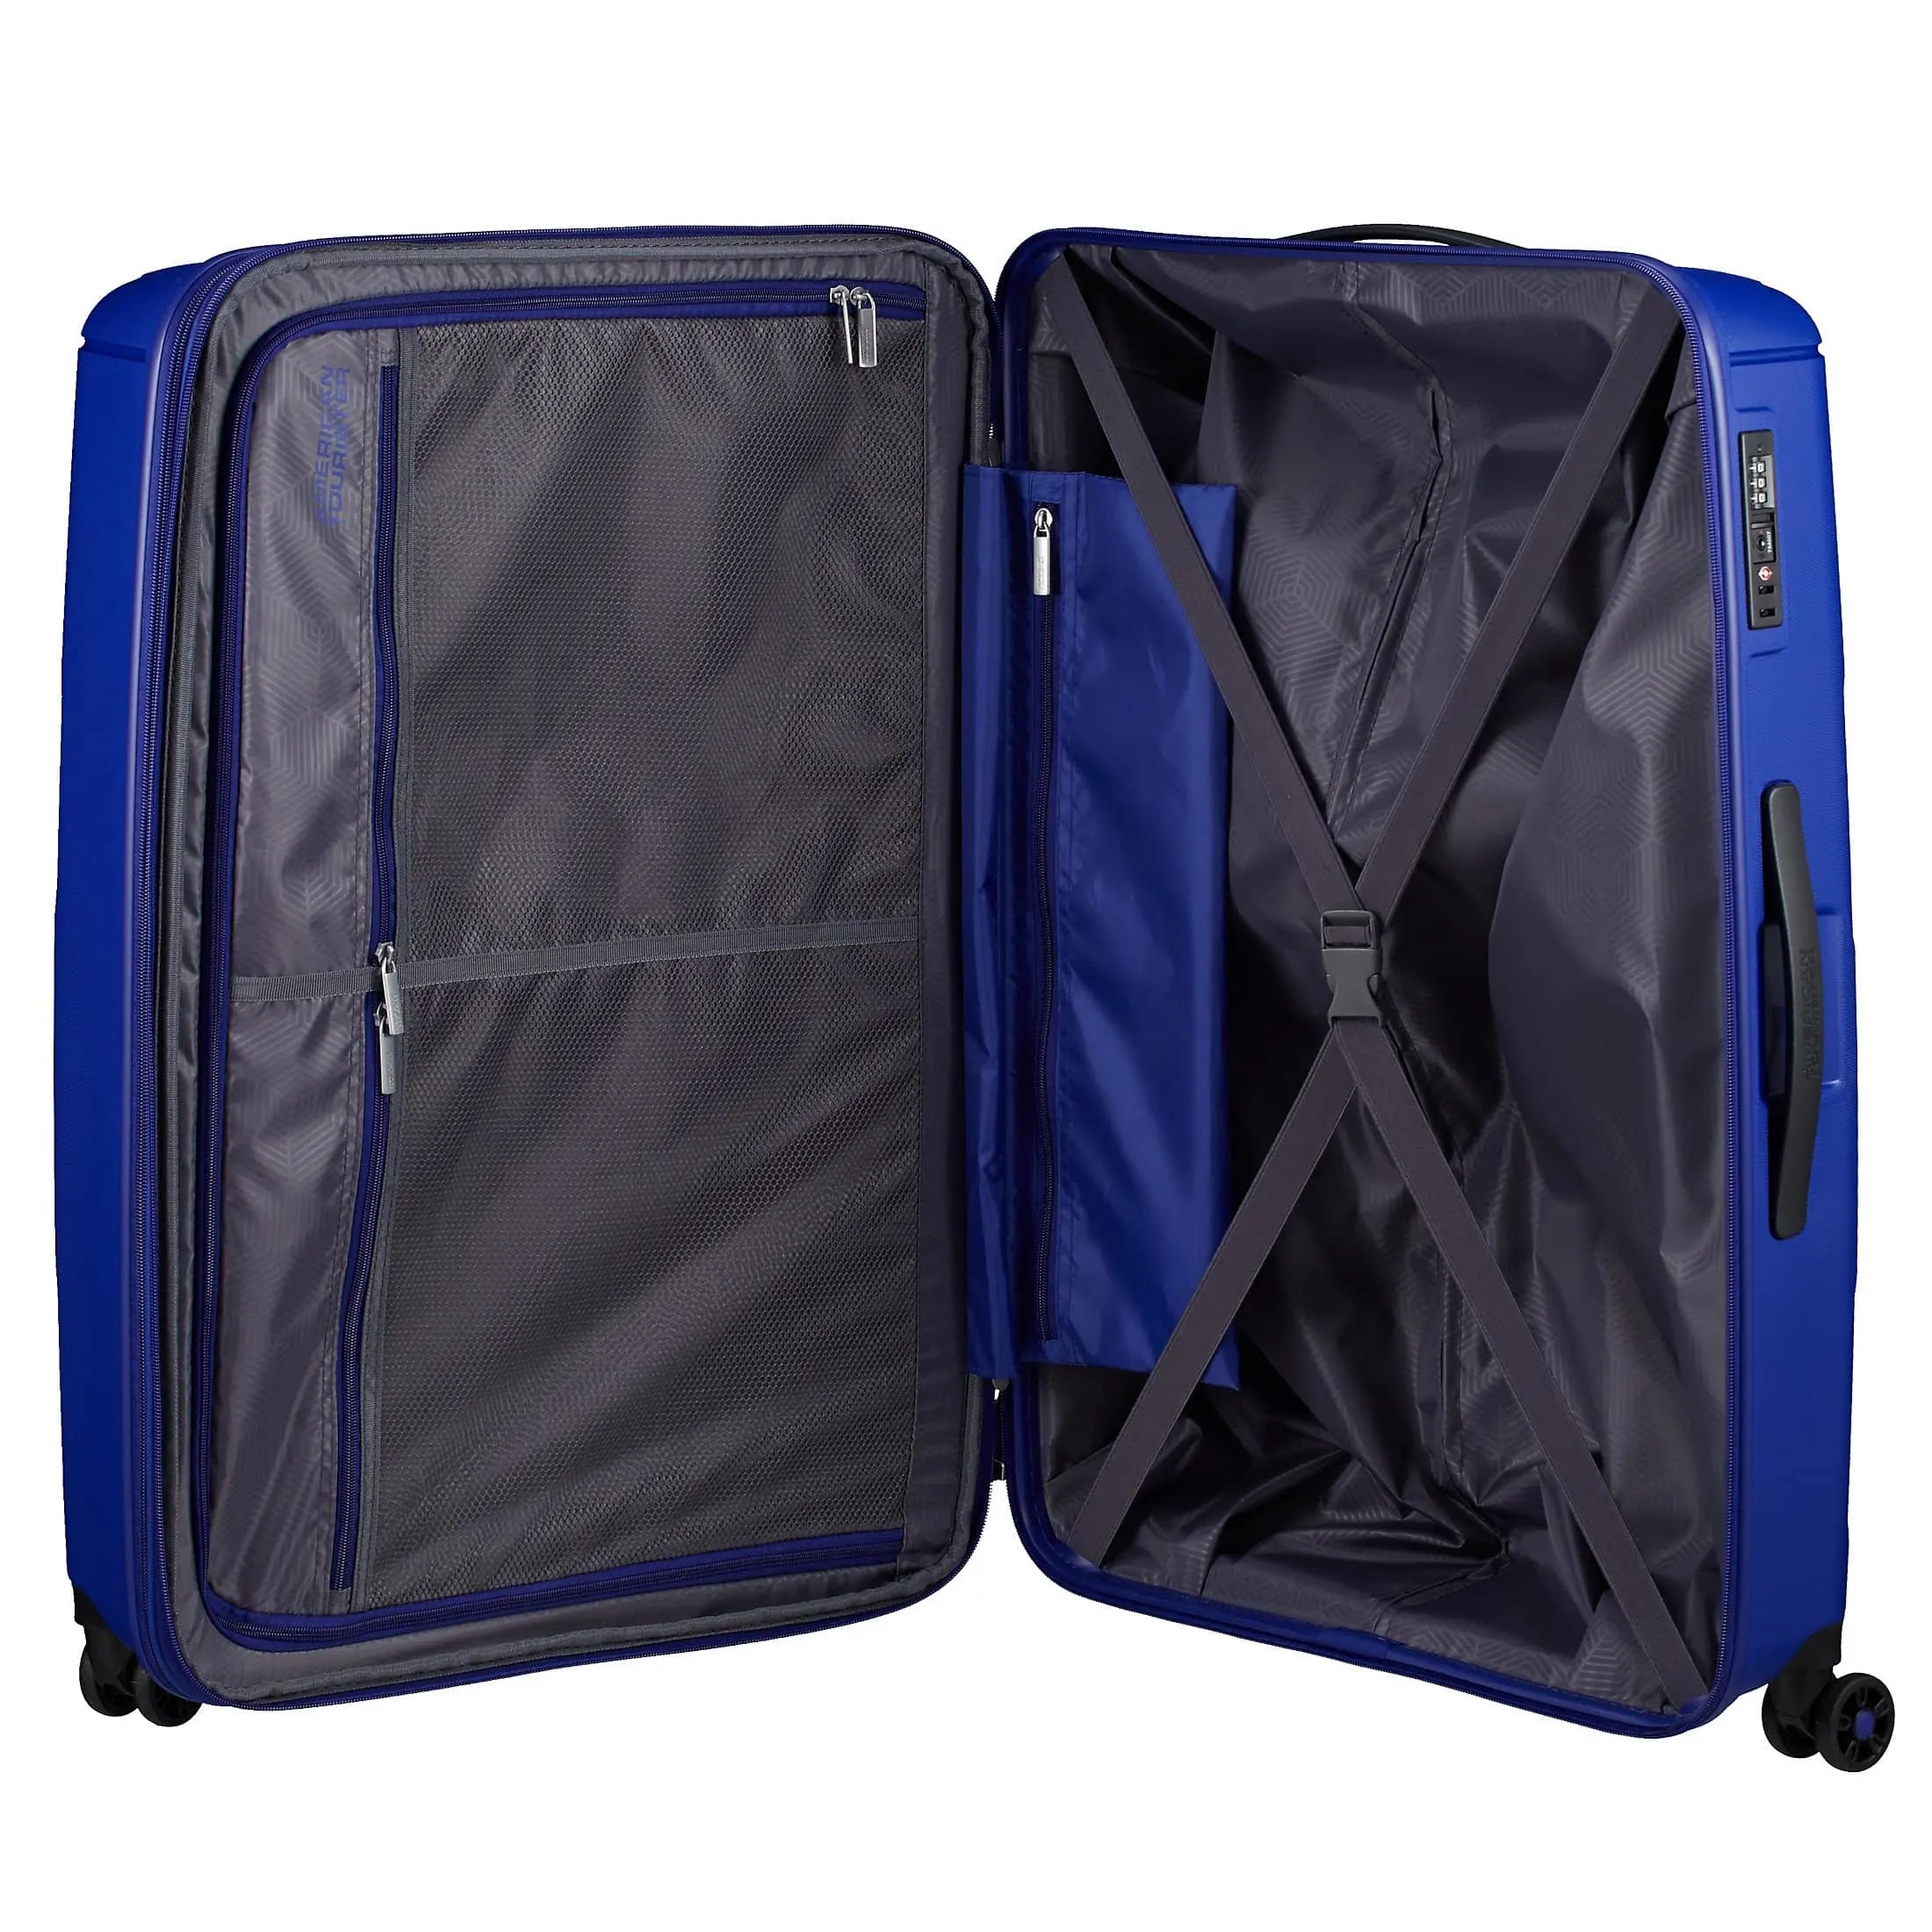 American Tourister Sunside trolley 4 roues 77 cm - Totally Sarcelle